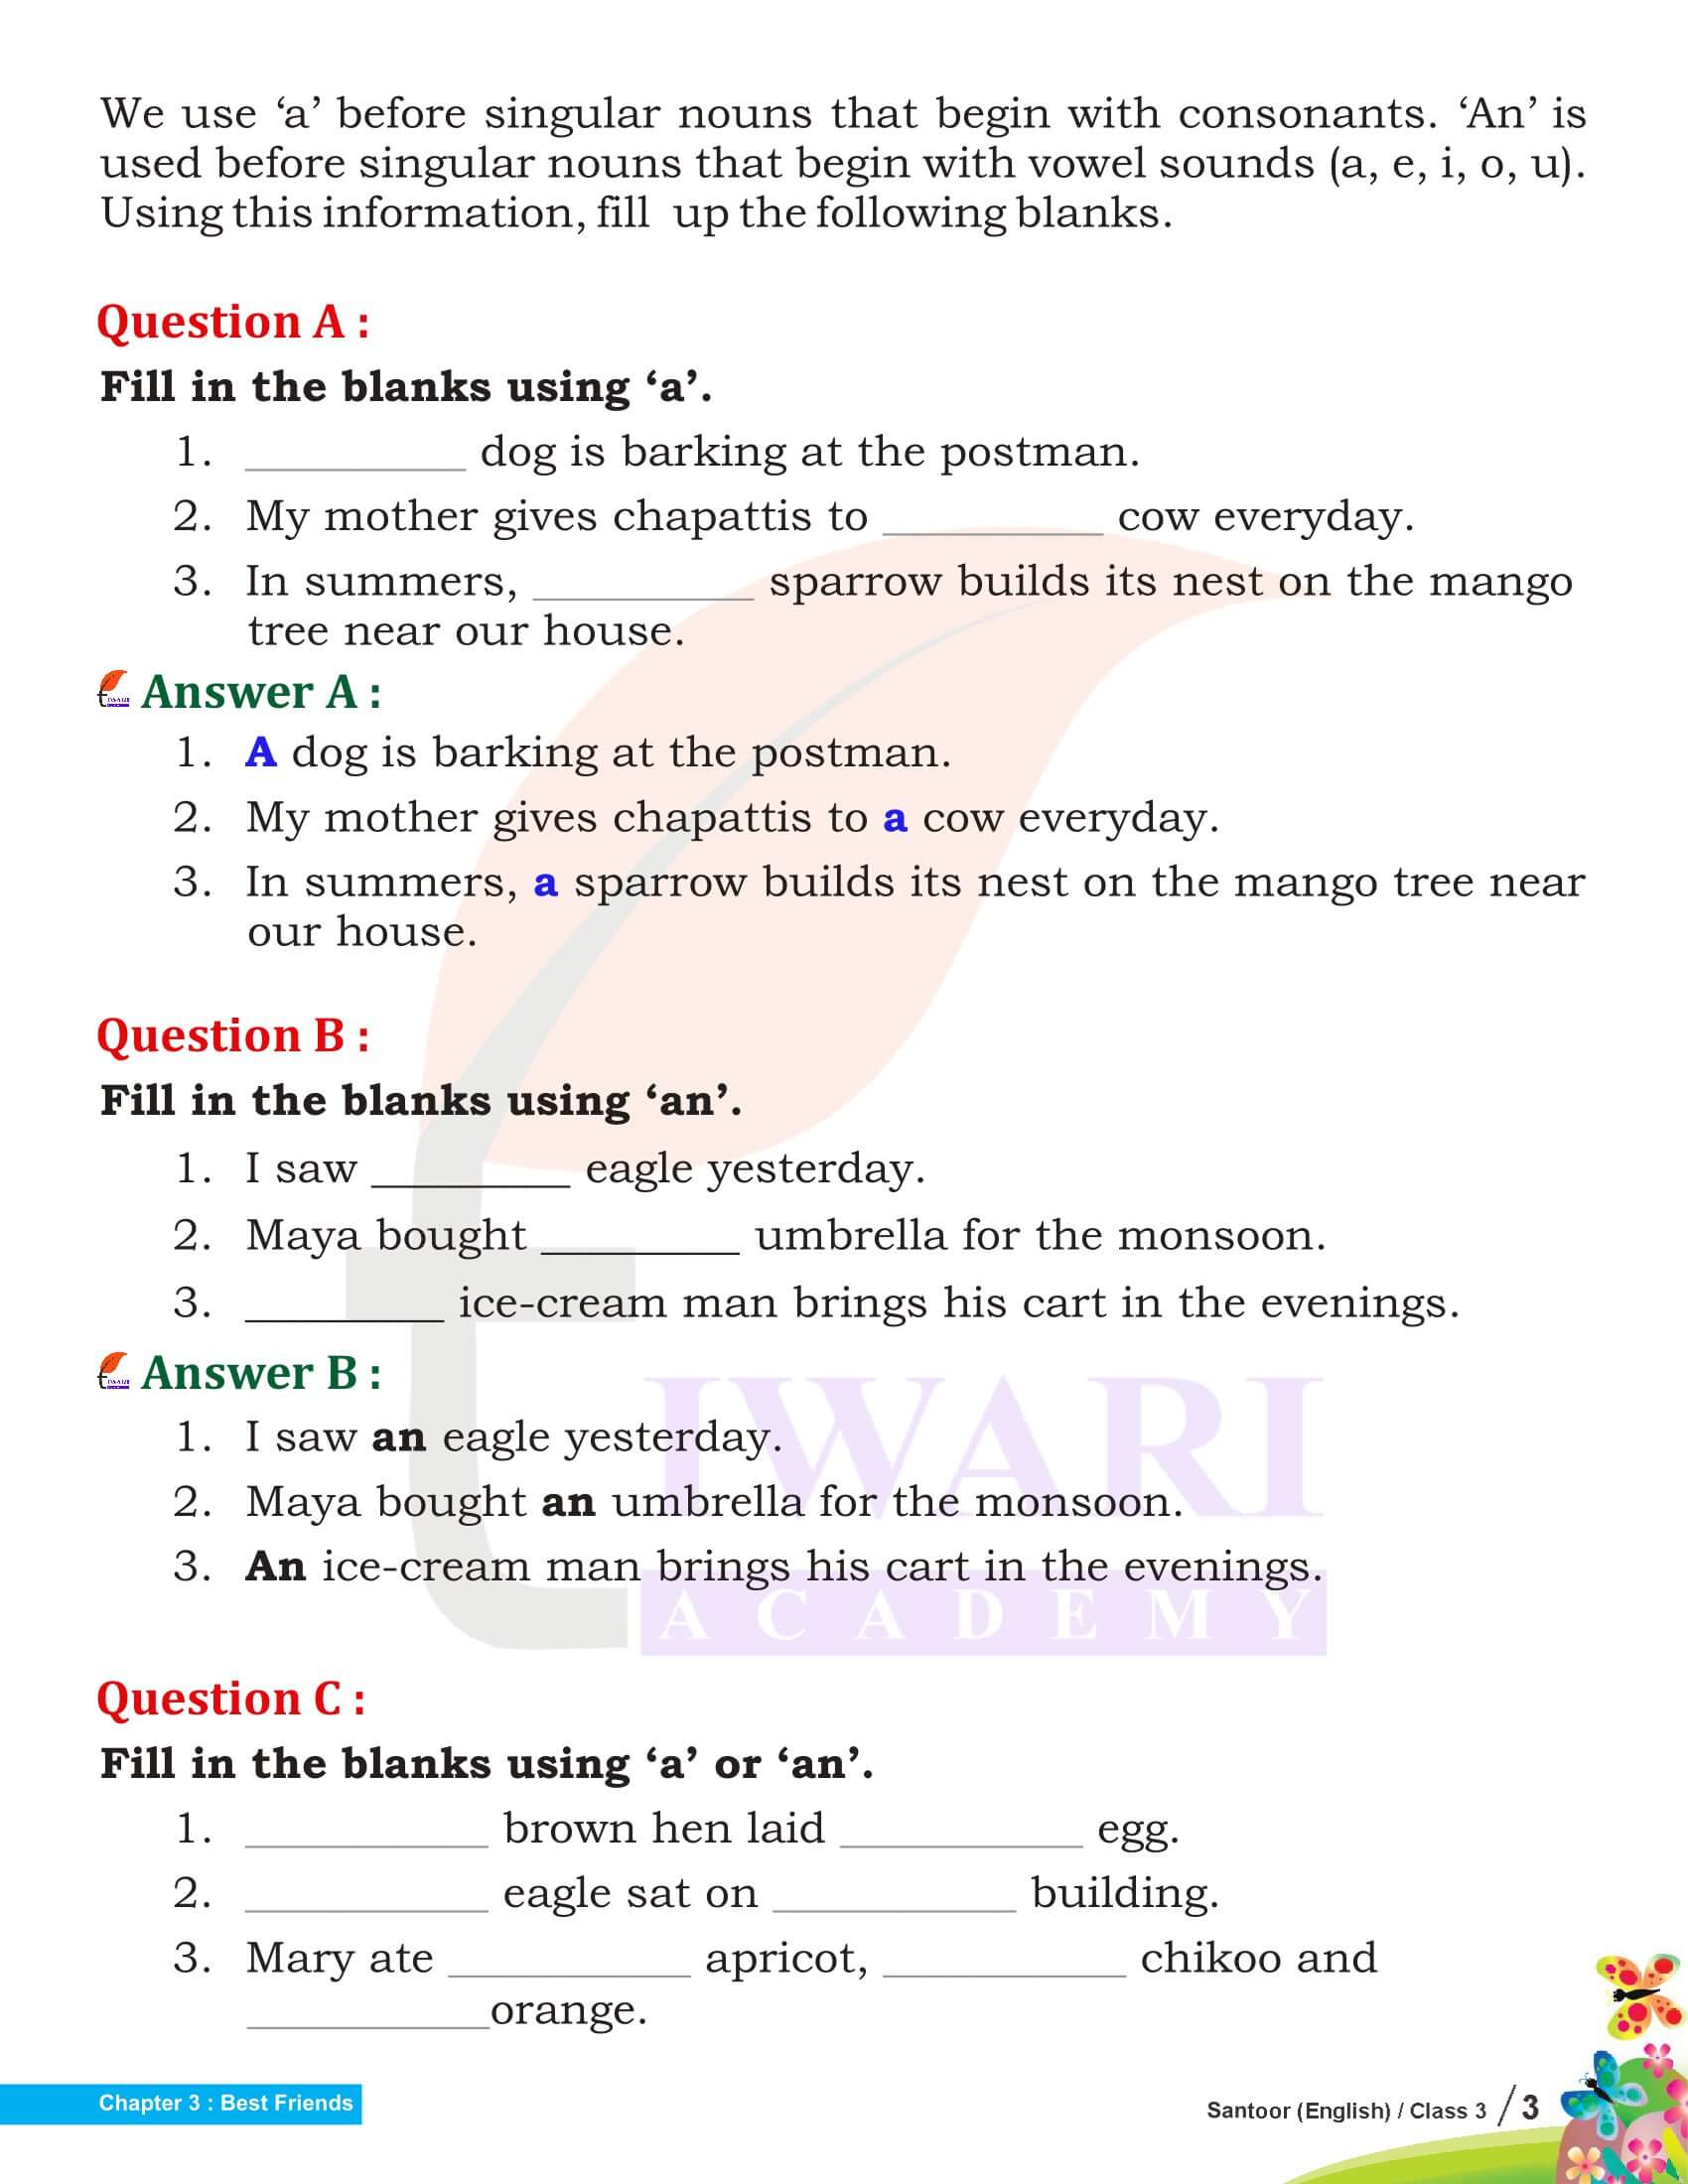 NCERT Solutions for Class 3 English Santoor Chapter 3 Questions